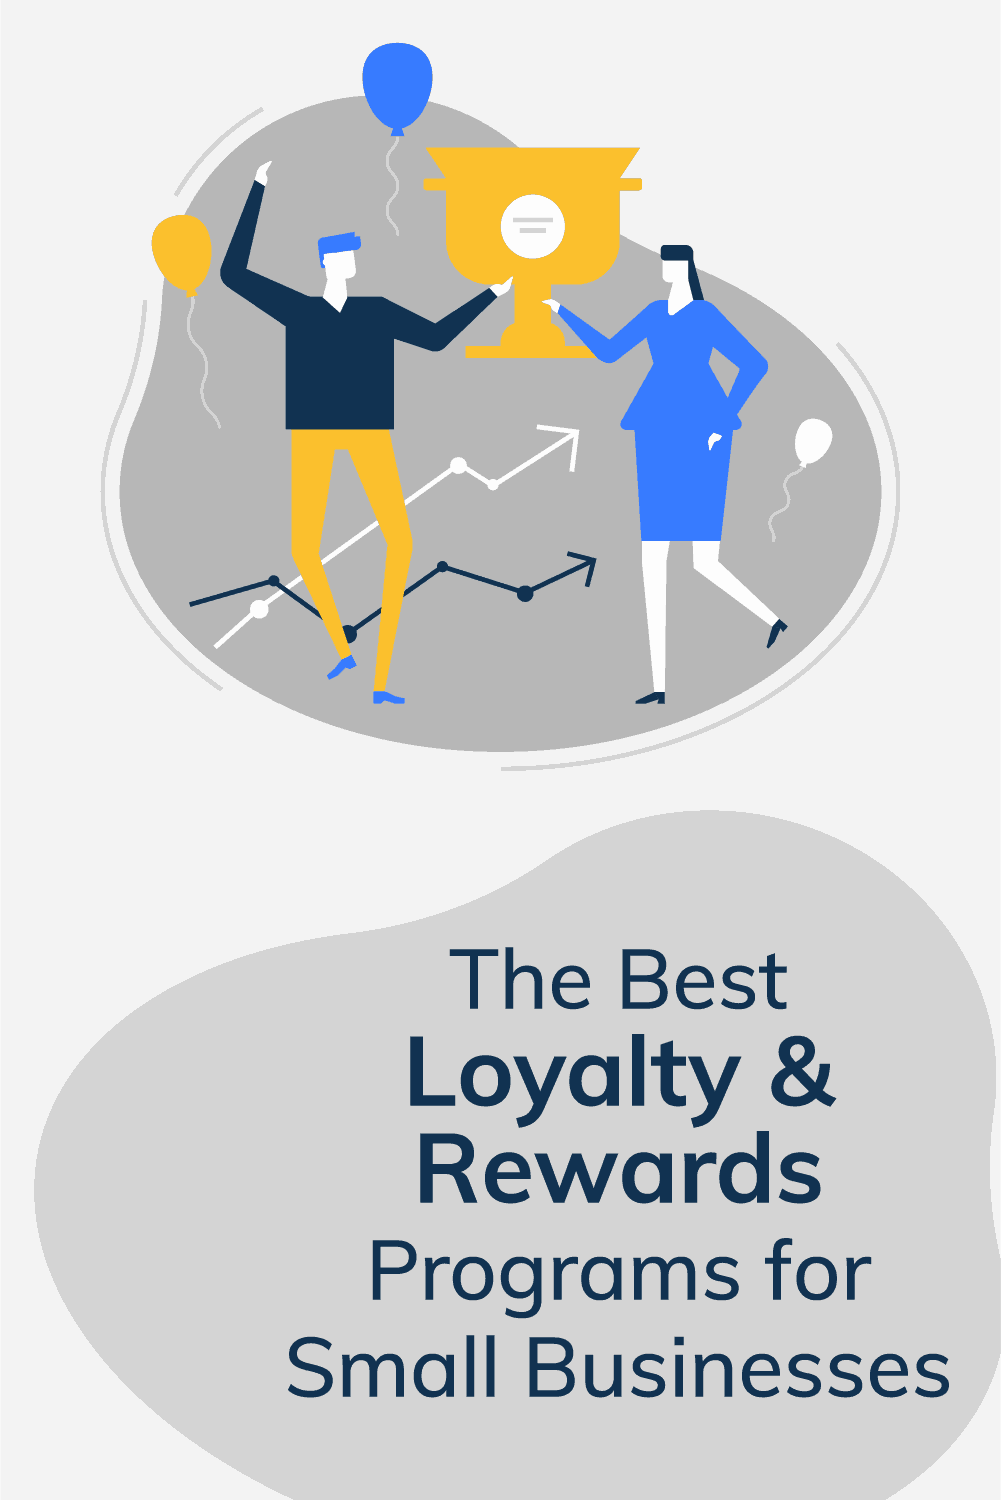 Loyalty and reward programs drive sales for businesses of all sizes. If you don’t already have a loyalty or rewards program, now might be the time to create one. via @scopedesign